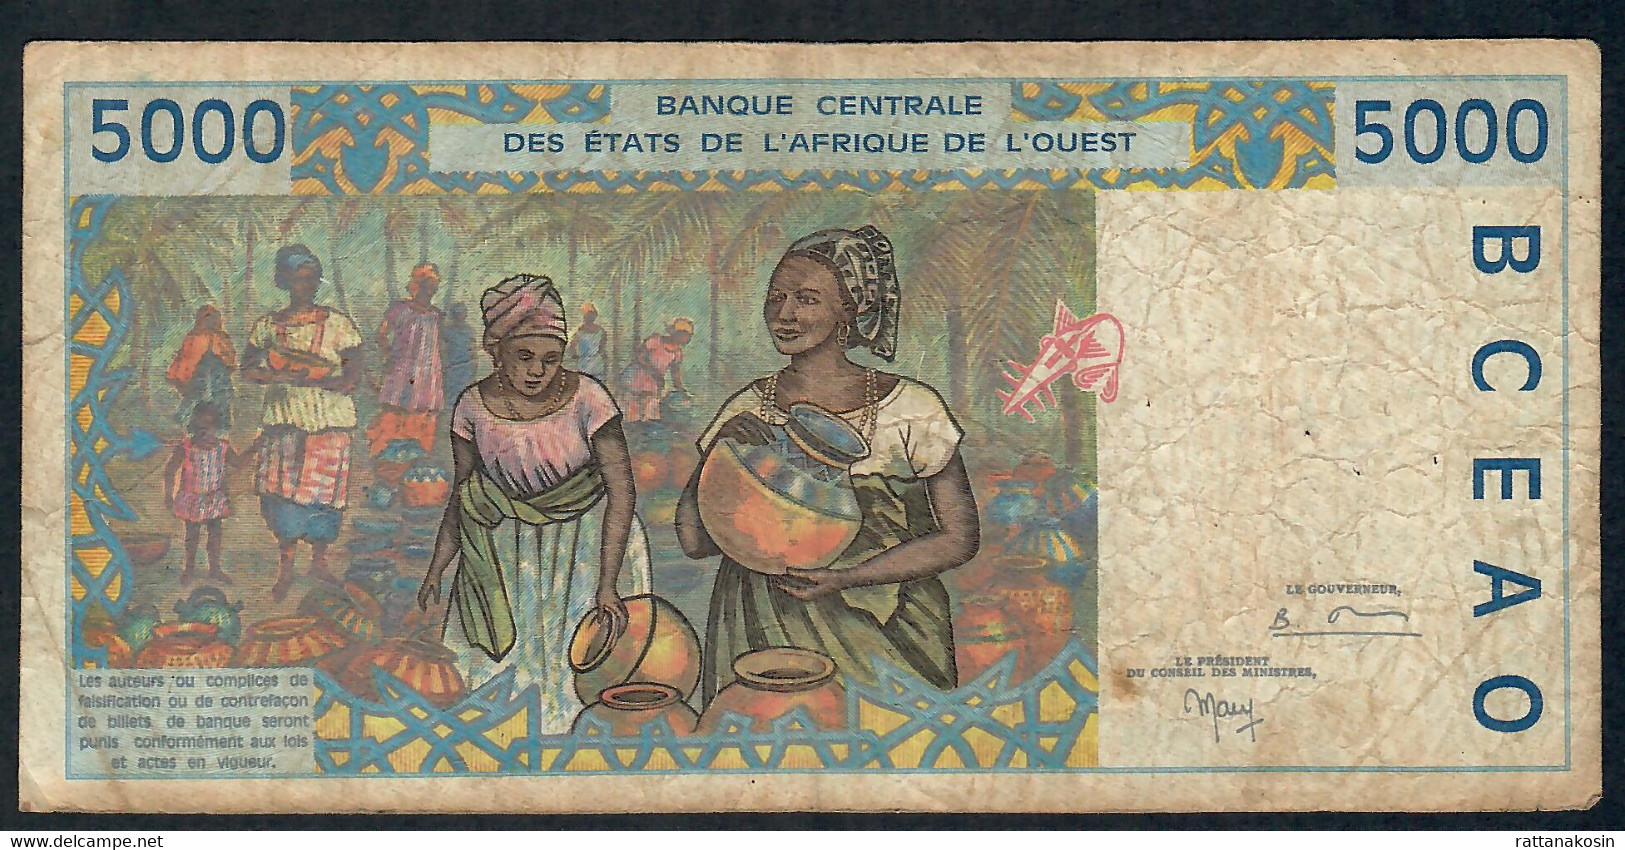 W.A.S. Ivory Coast  P113Ai  5000  FRANCS (19)99 Or 1999  FINE - Stati Dell'Africa Occidentale